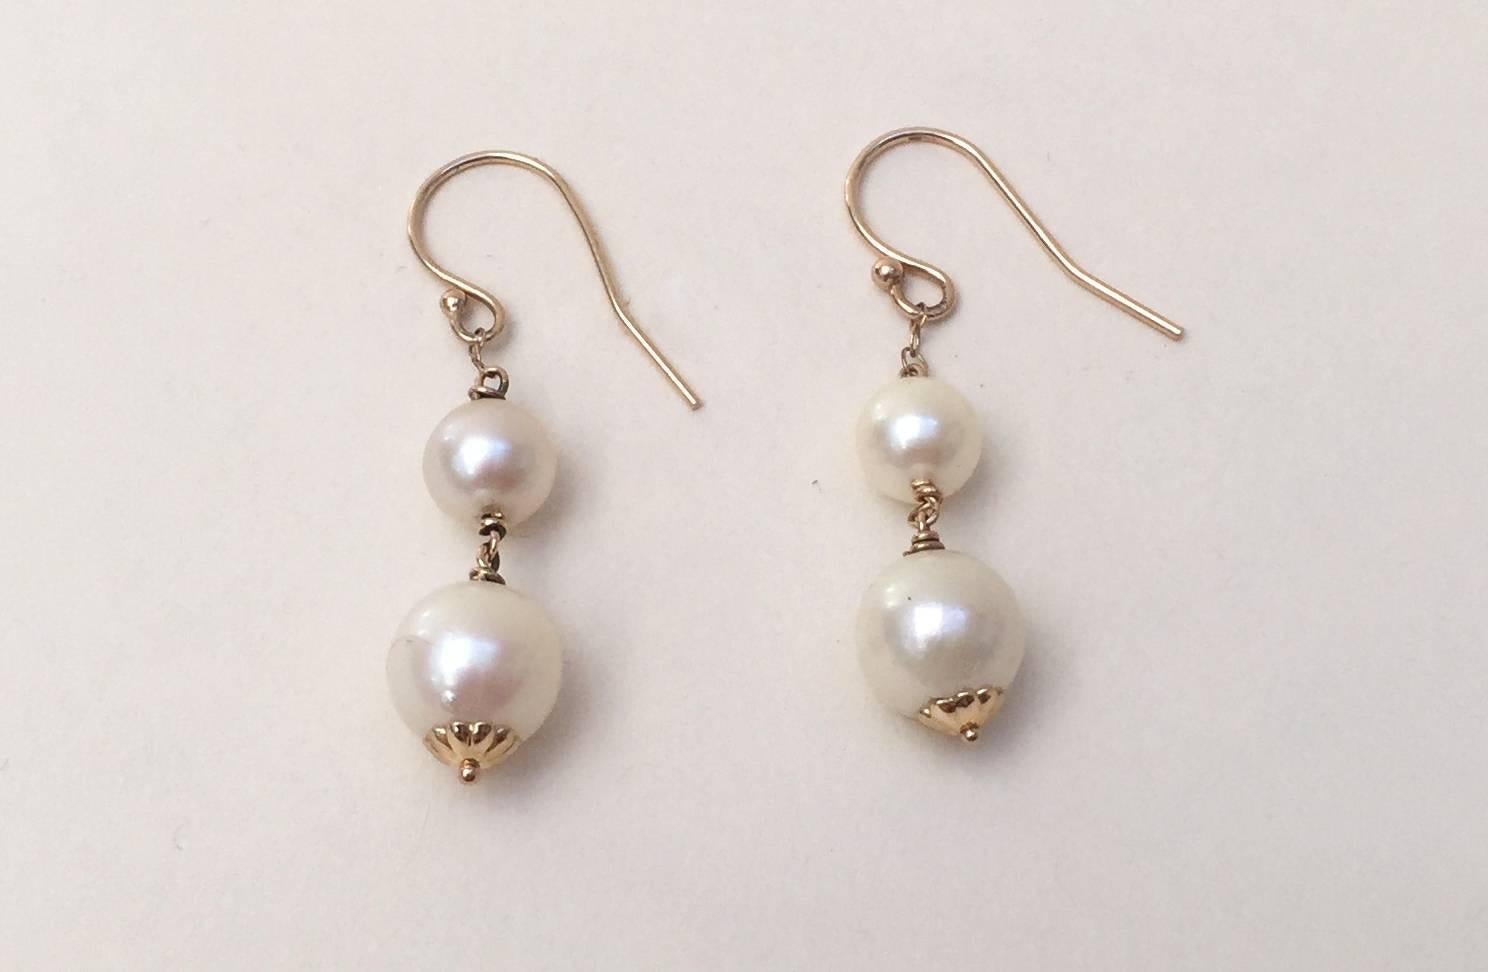 Artist Double Pearl Earrings with 14 Karat Yellow Gold Hook and Wiring by Marina J.